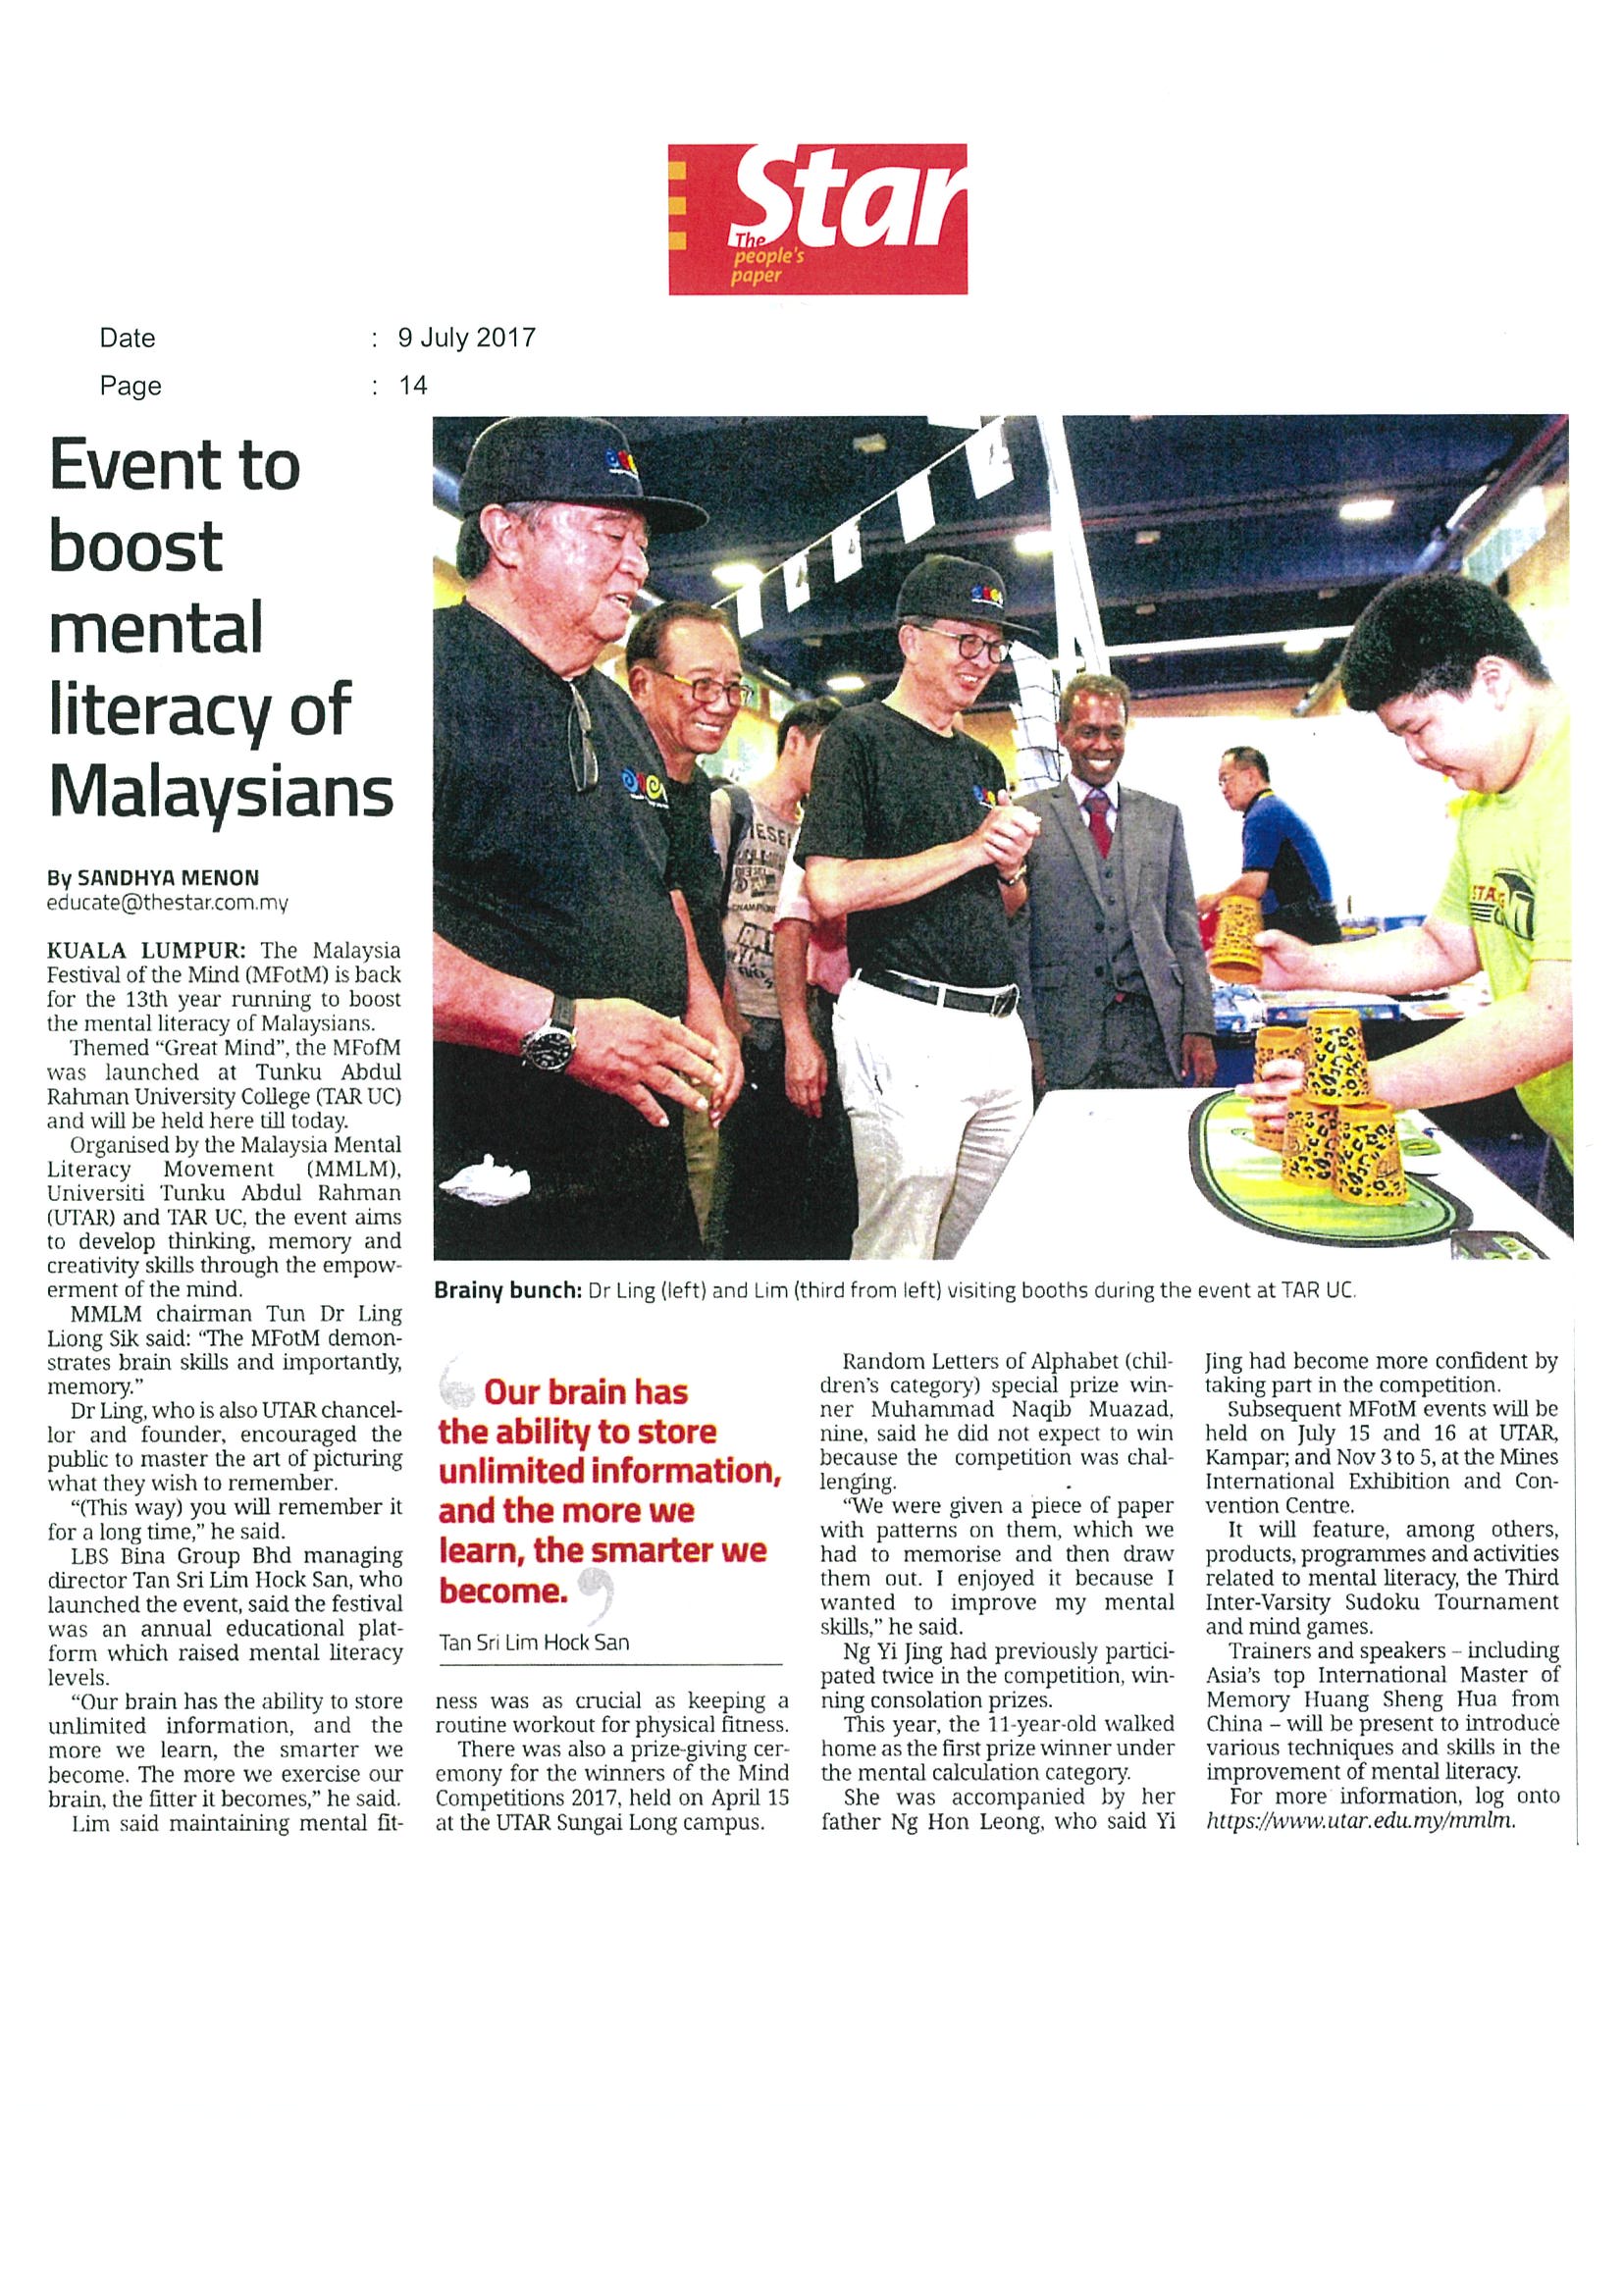 2017.07.09 The Star – Event to boost mental literacy of Malaysians